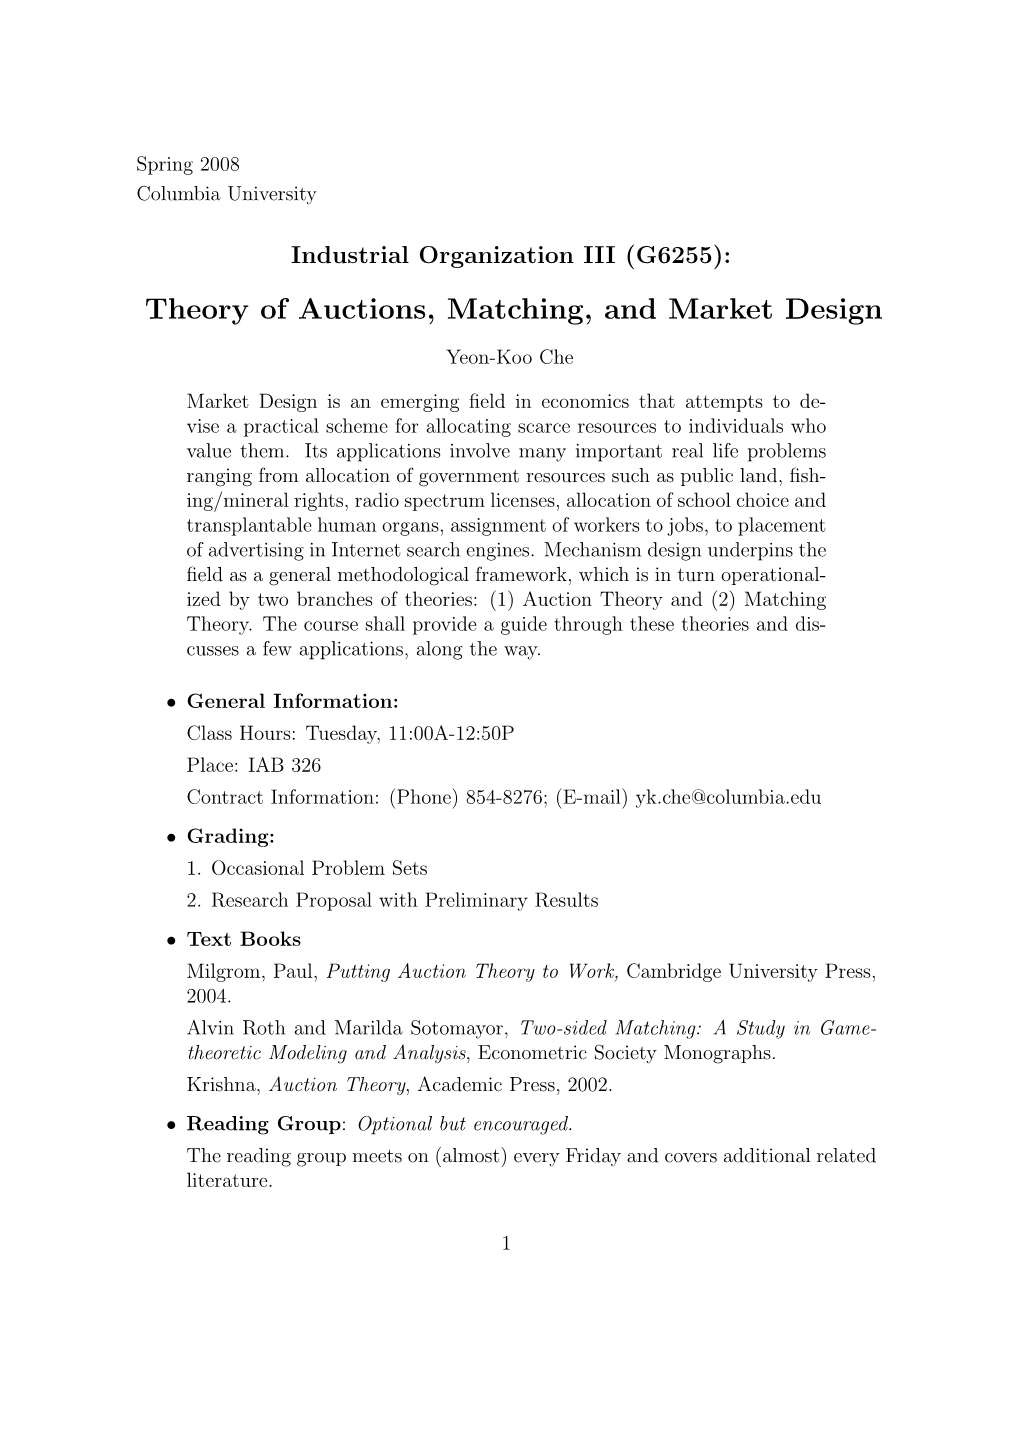 Theory of Auctions, Matching, and Market Design